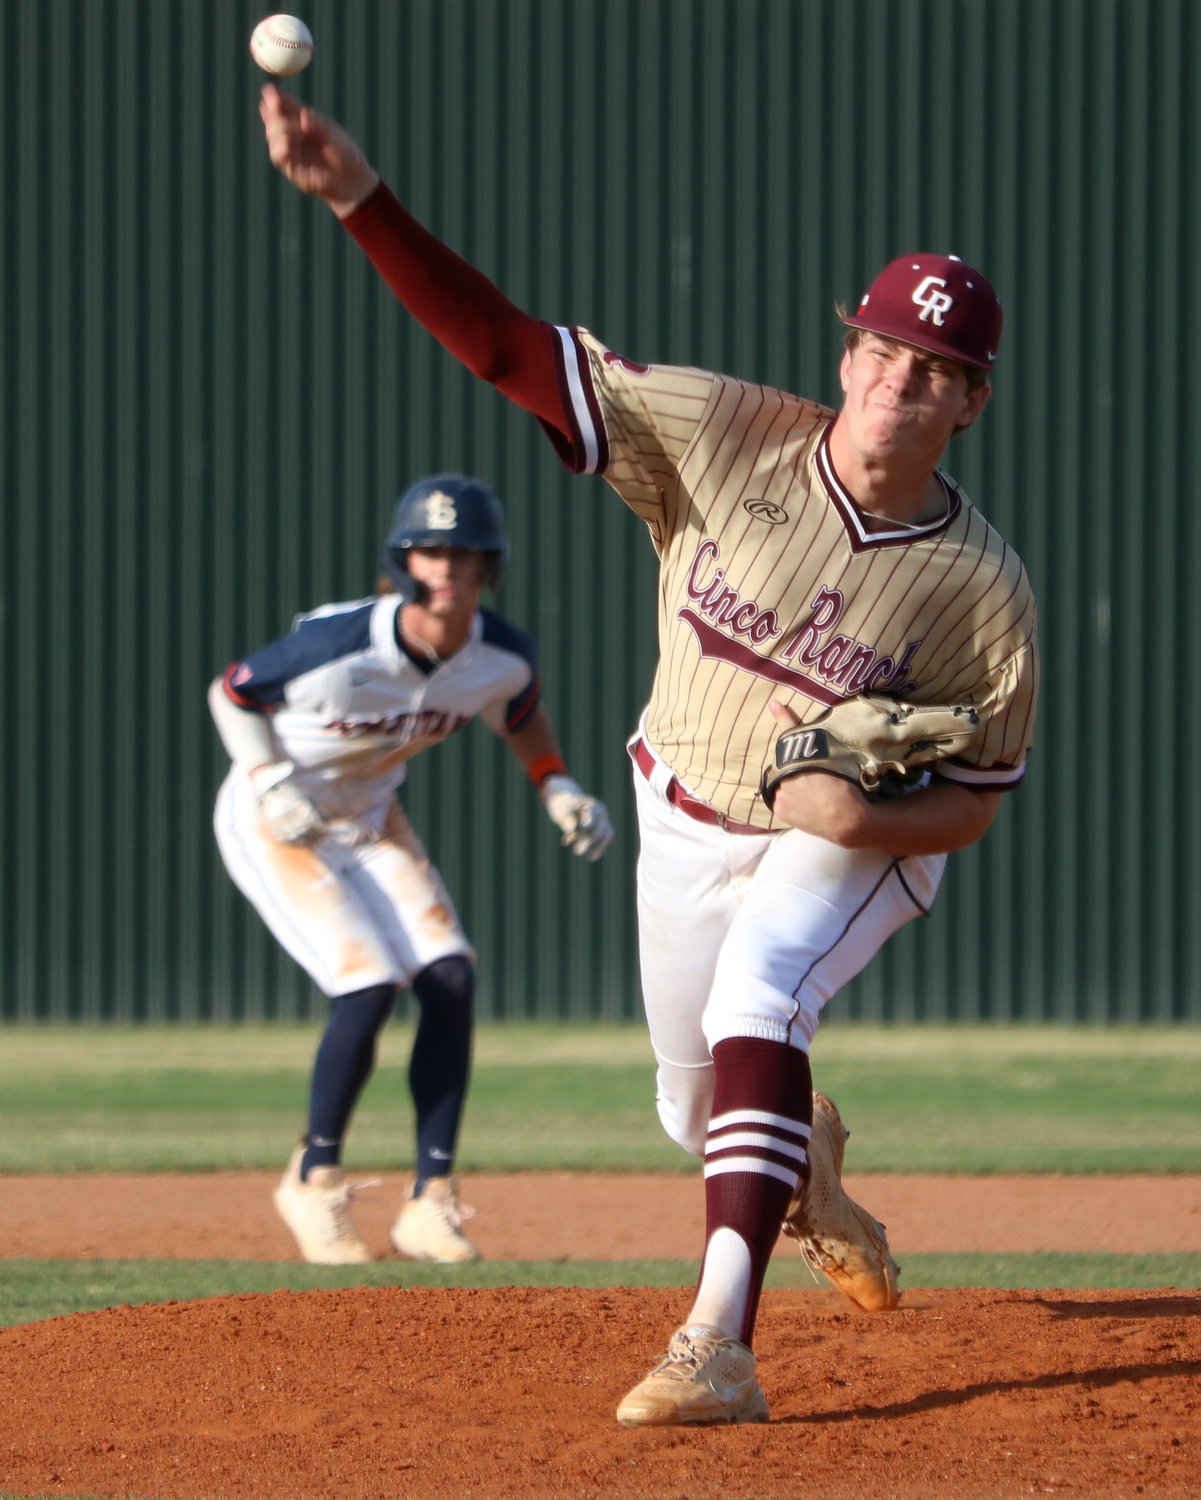 Zach Royse pitches during Friday’s District 19-6A  game between Seven Lakes and Cinco Ranch at the Seven Lakes baseball field.